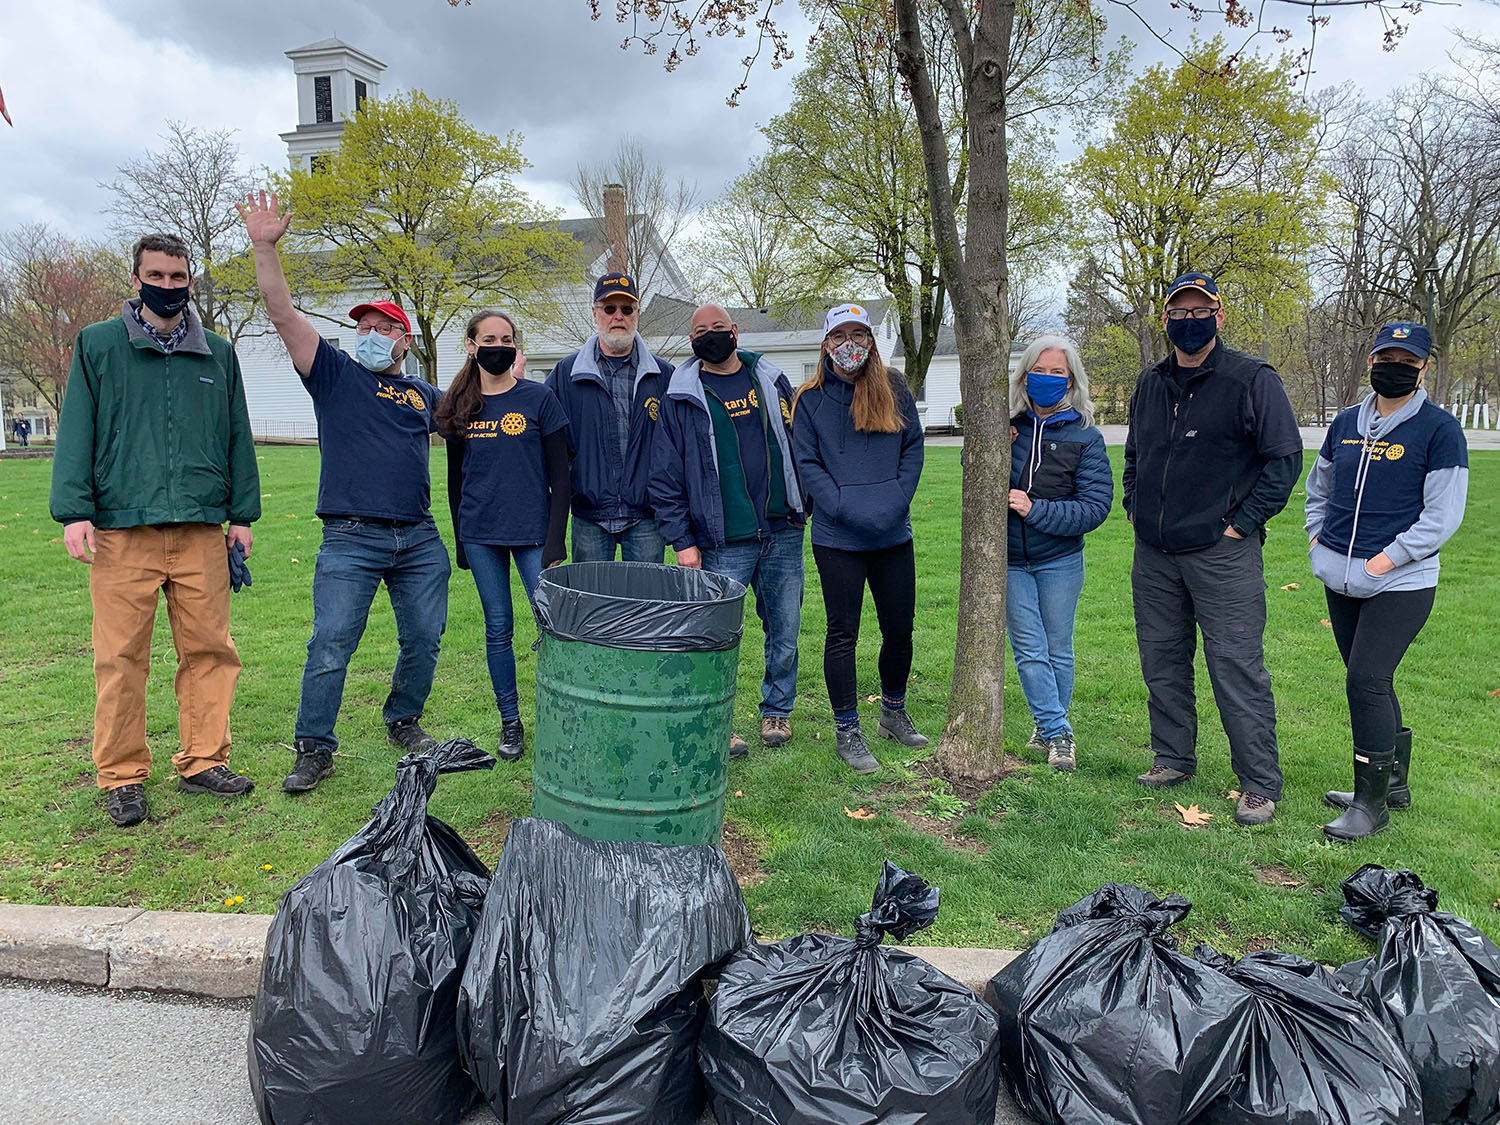 HF-M Rotary celebrates Earth Day with “clean up” event